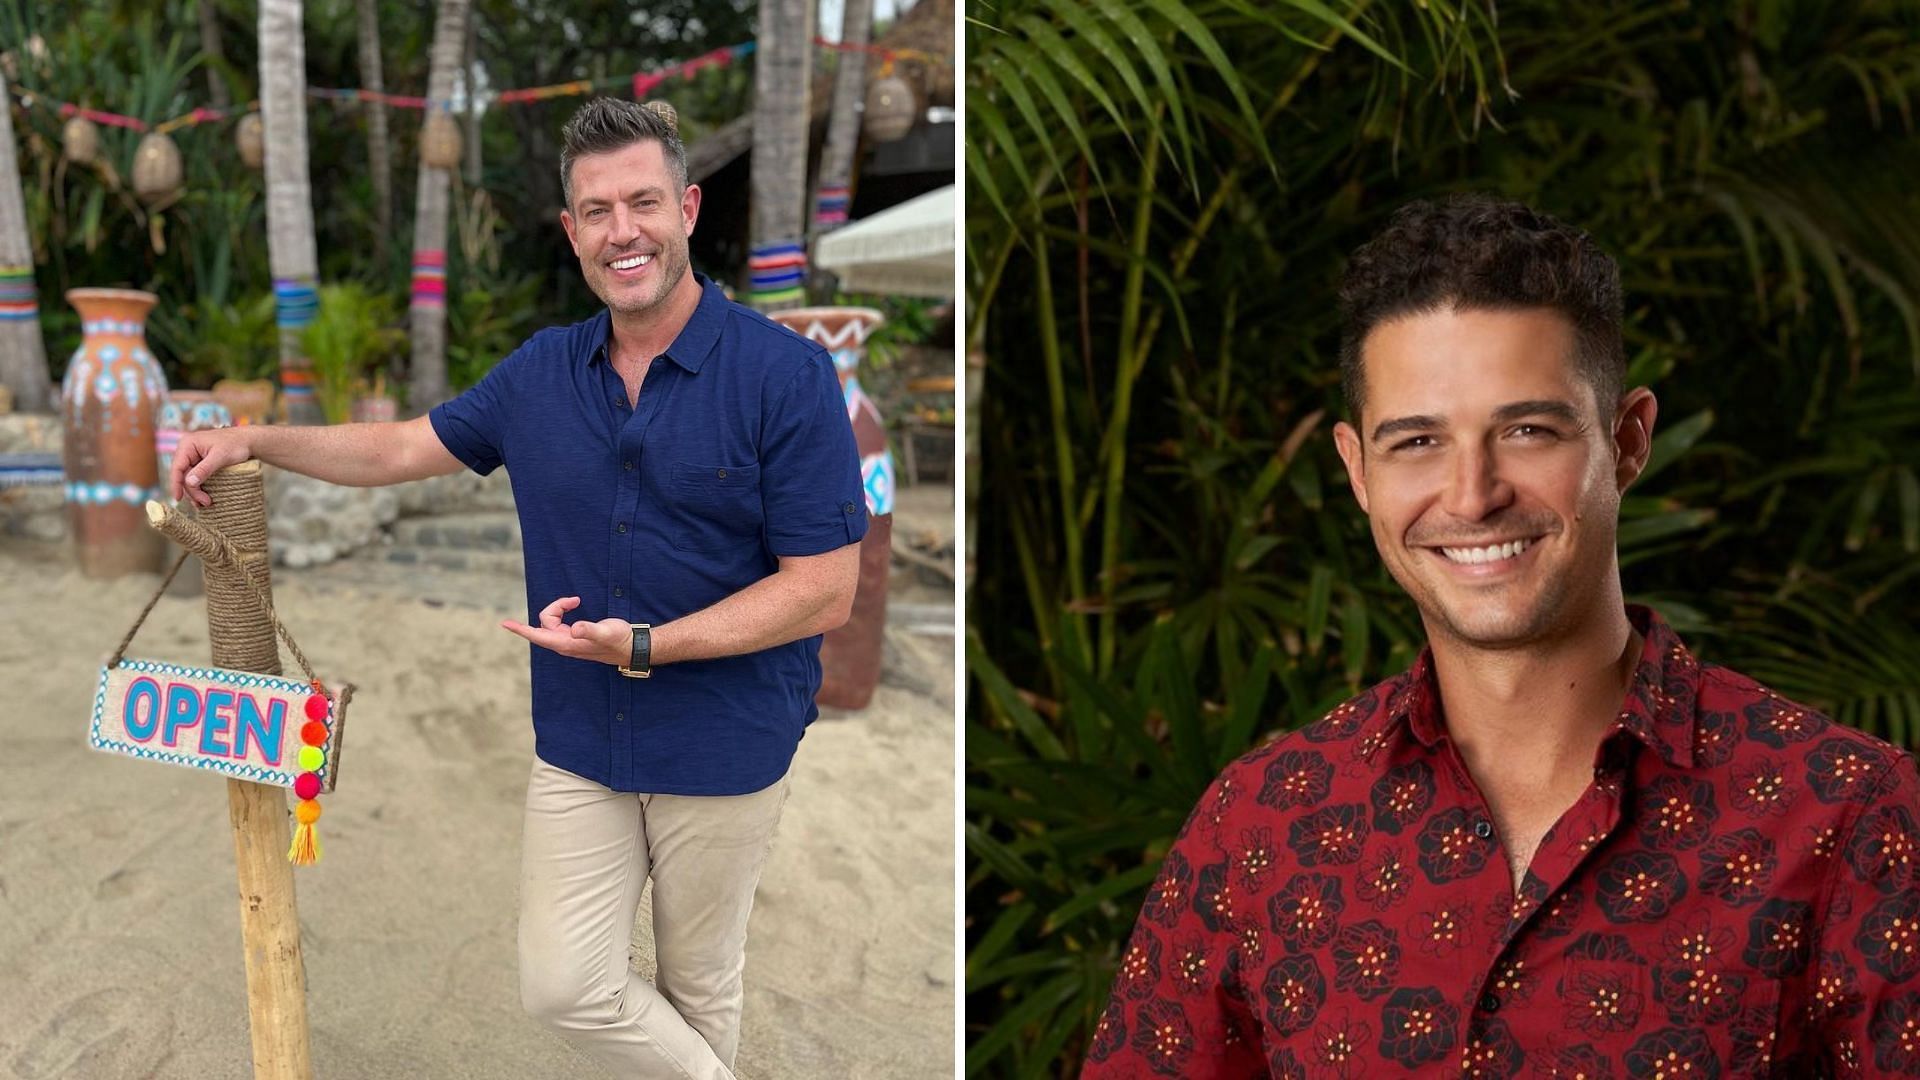 Bachelor in Paradise is set to welcome the hopefuls